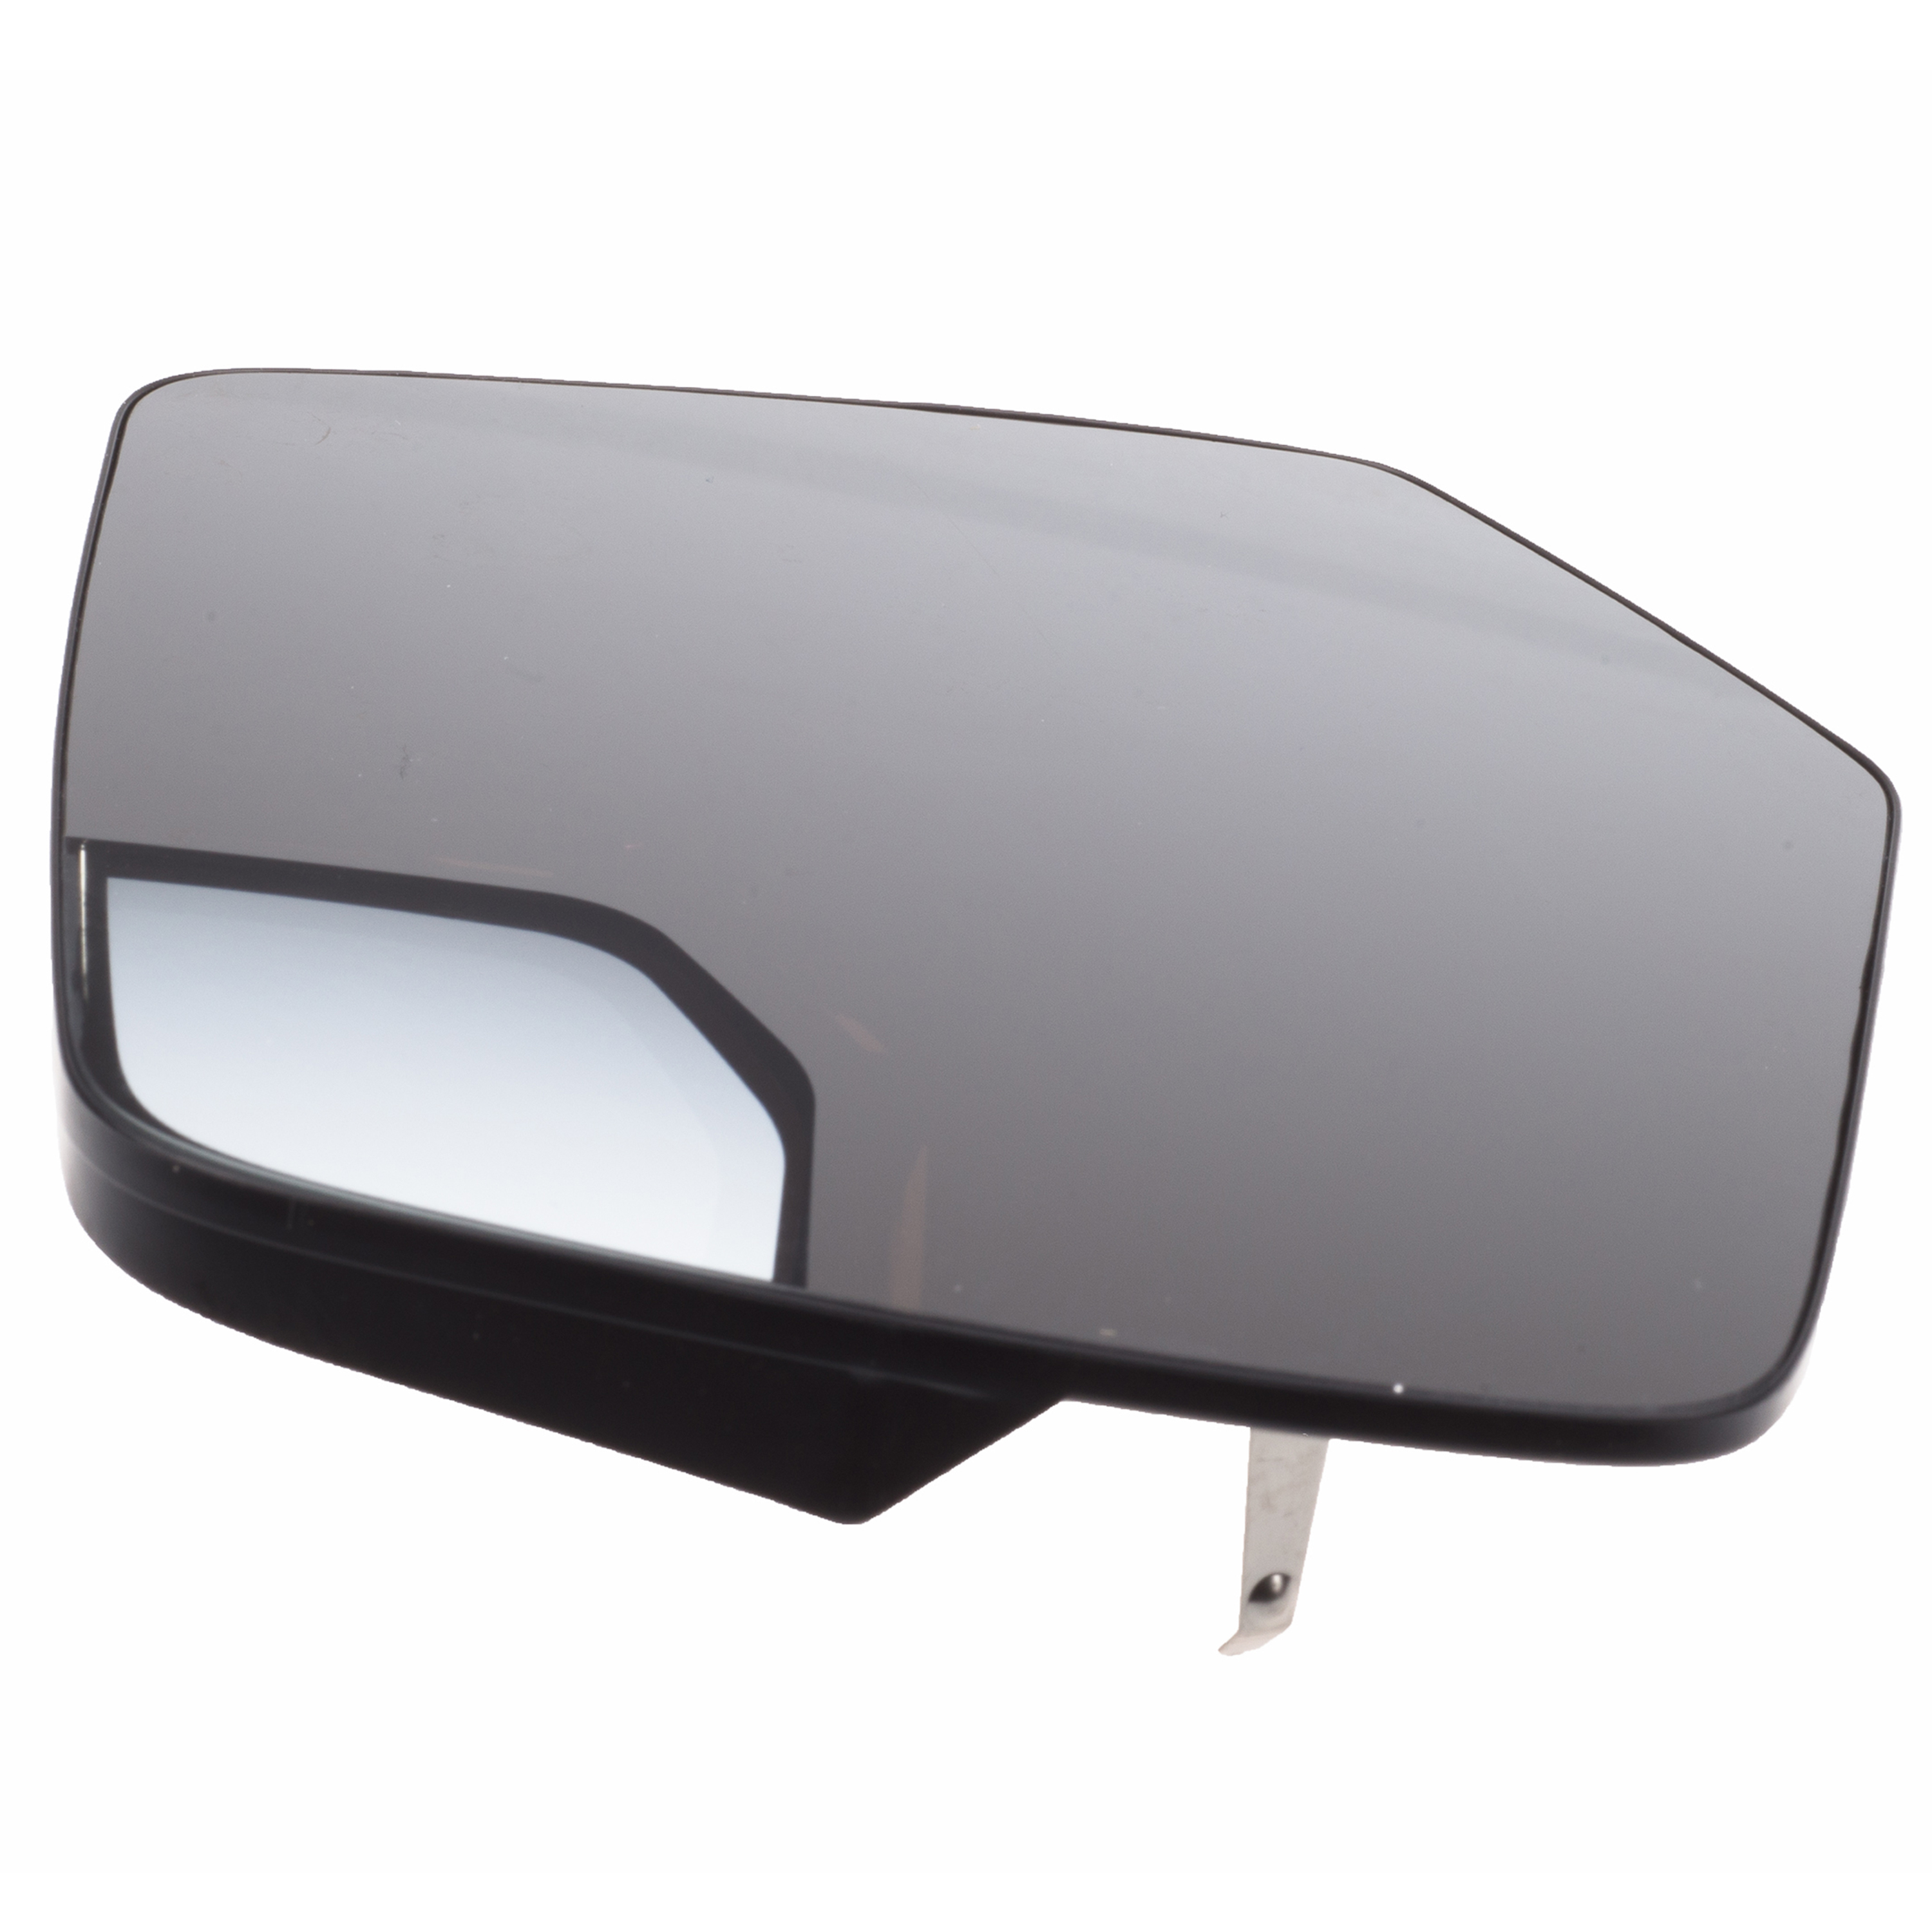 2010-2012 Ford Escape Mercury Mariner Left Driver Side View Mirror Glass OEM NEW | eBay 2012 Ford Escape Driver Side Mirror Replacement